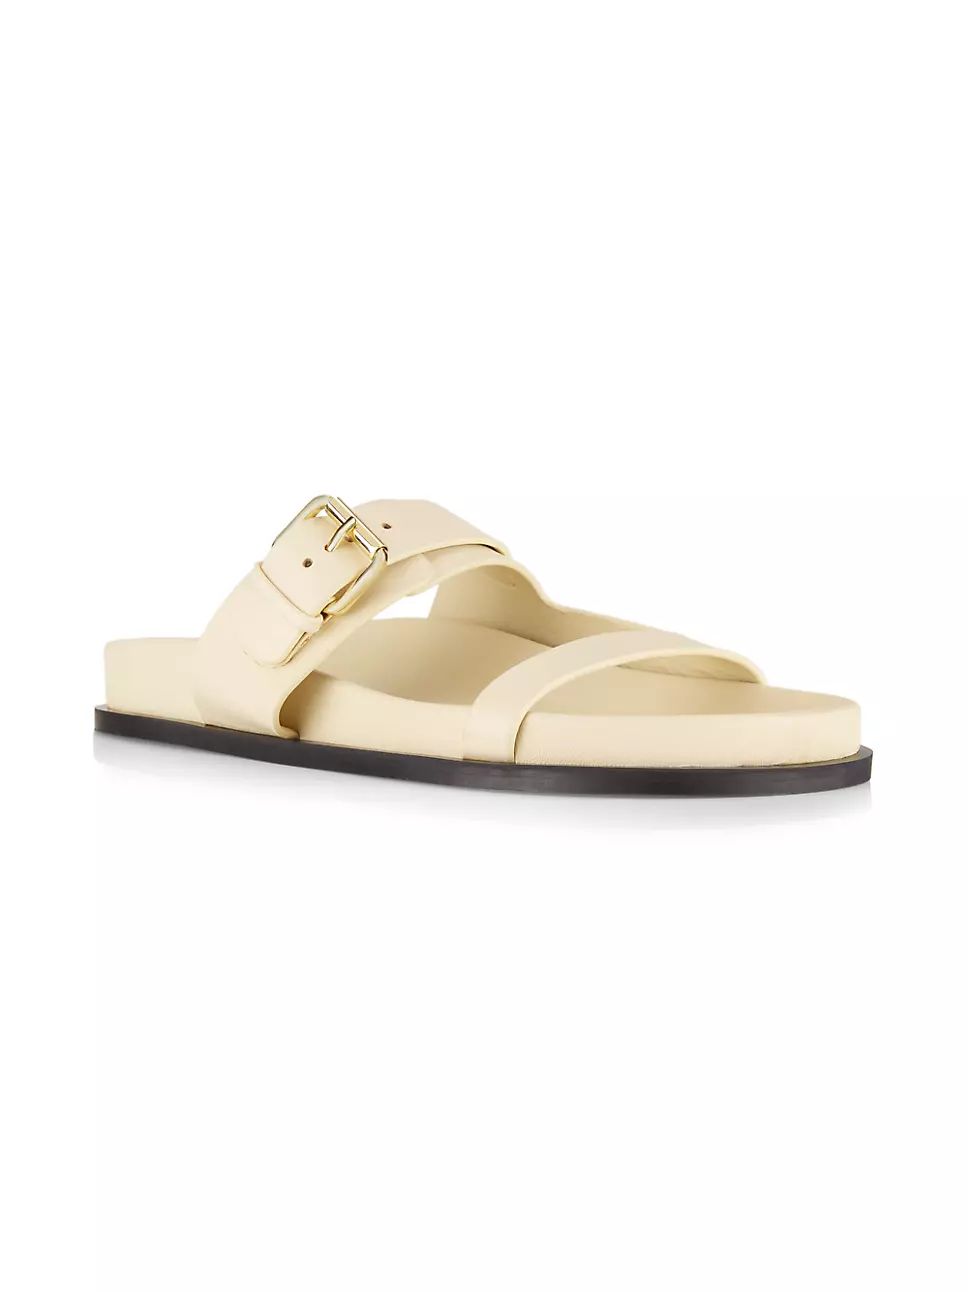 Prince Leather Open-Toe Sandals | Saks Fifth Avenue